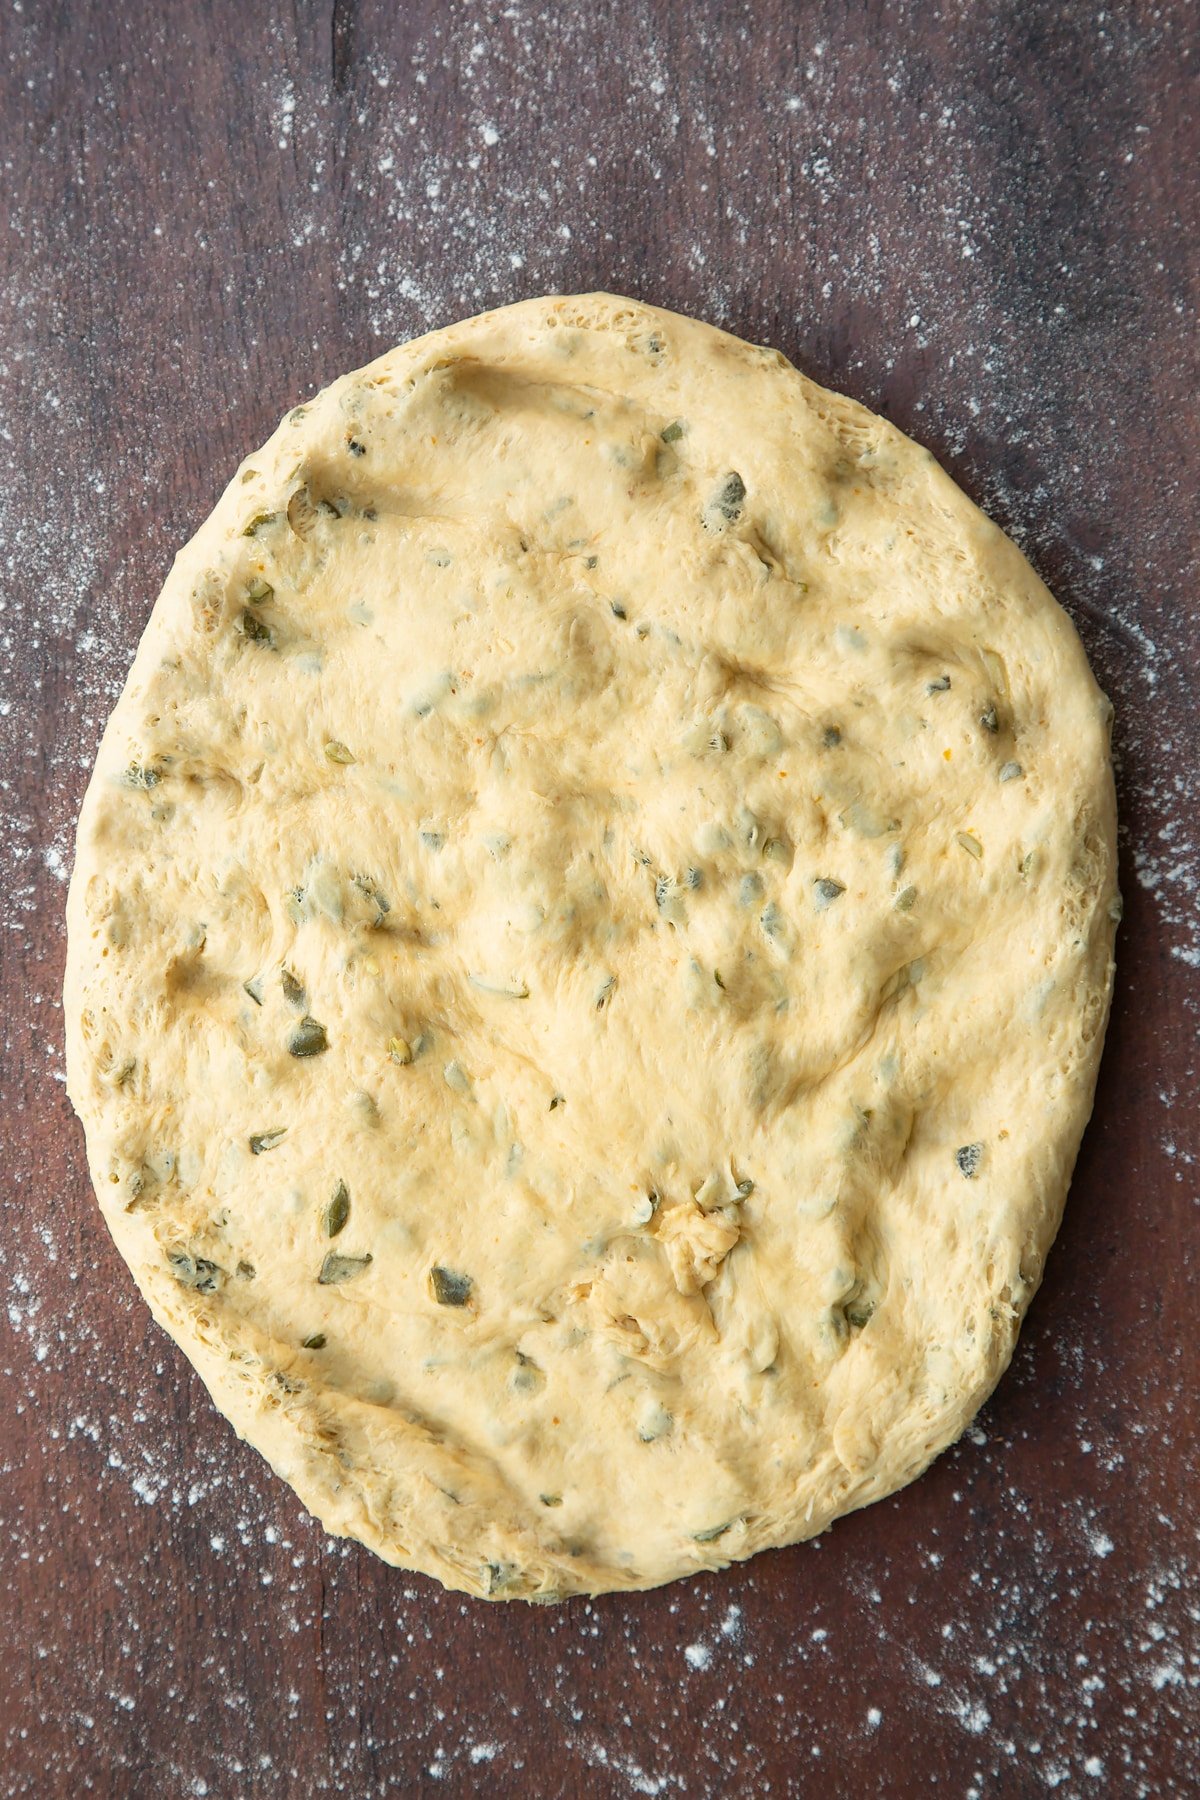 Pumpkin seed bread dough pressed into a flat oval on a floured surface.